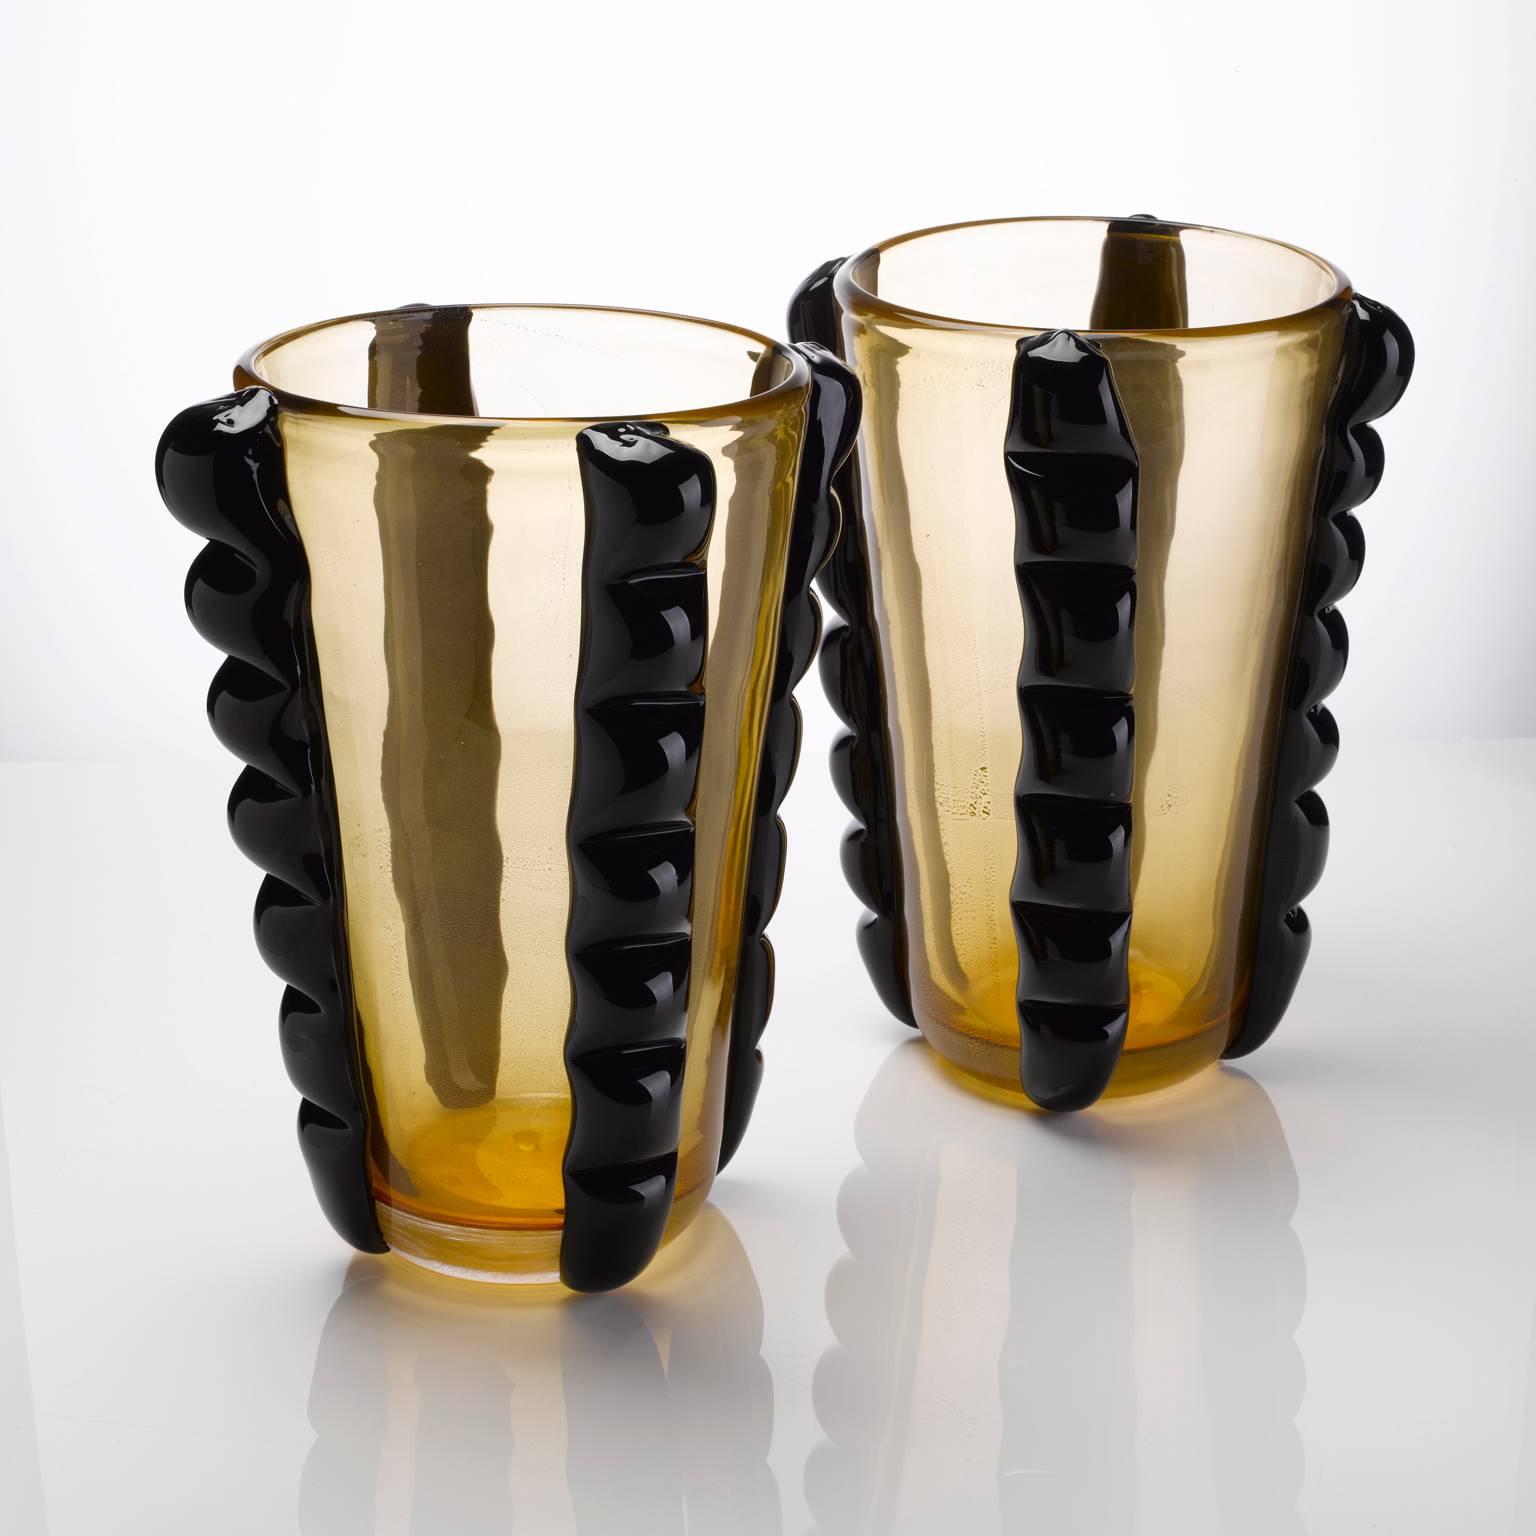 A pair of exquisite Pino Signoretto Murano vases with gold finish to the body and heavy black external detailing.

Signature on the bottom of each vase.